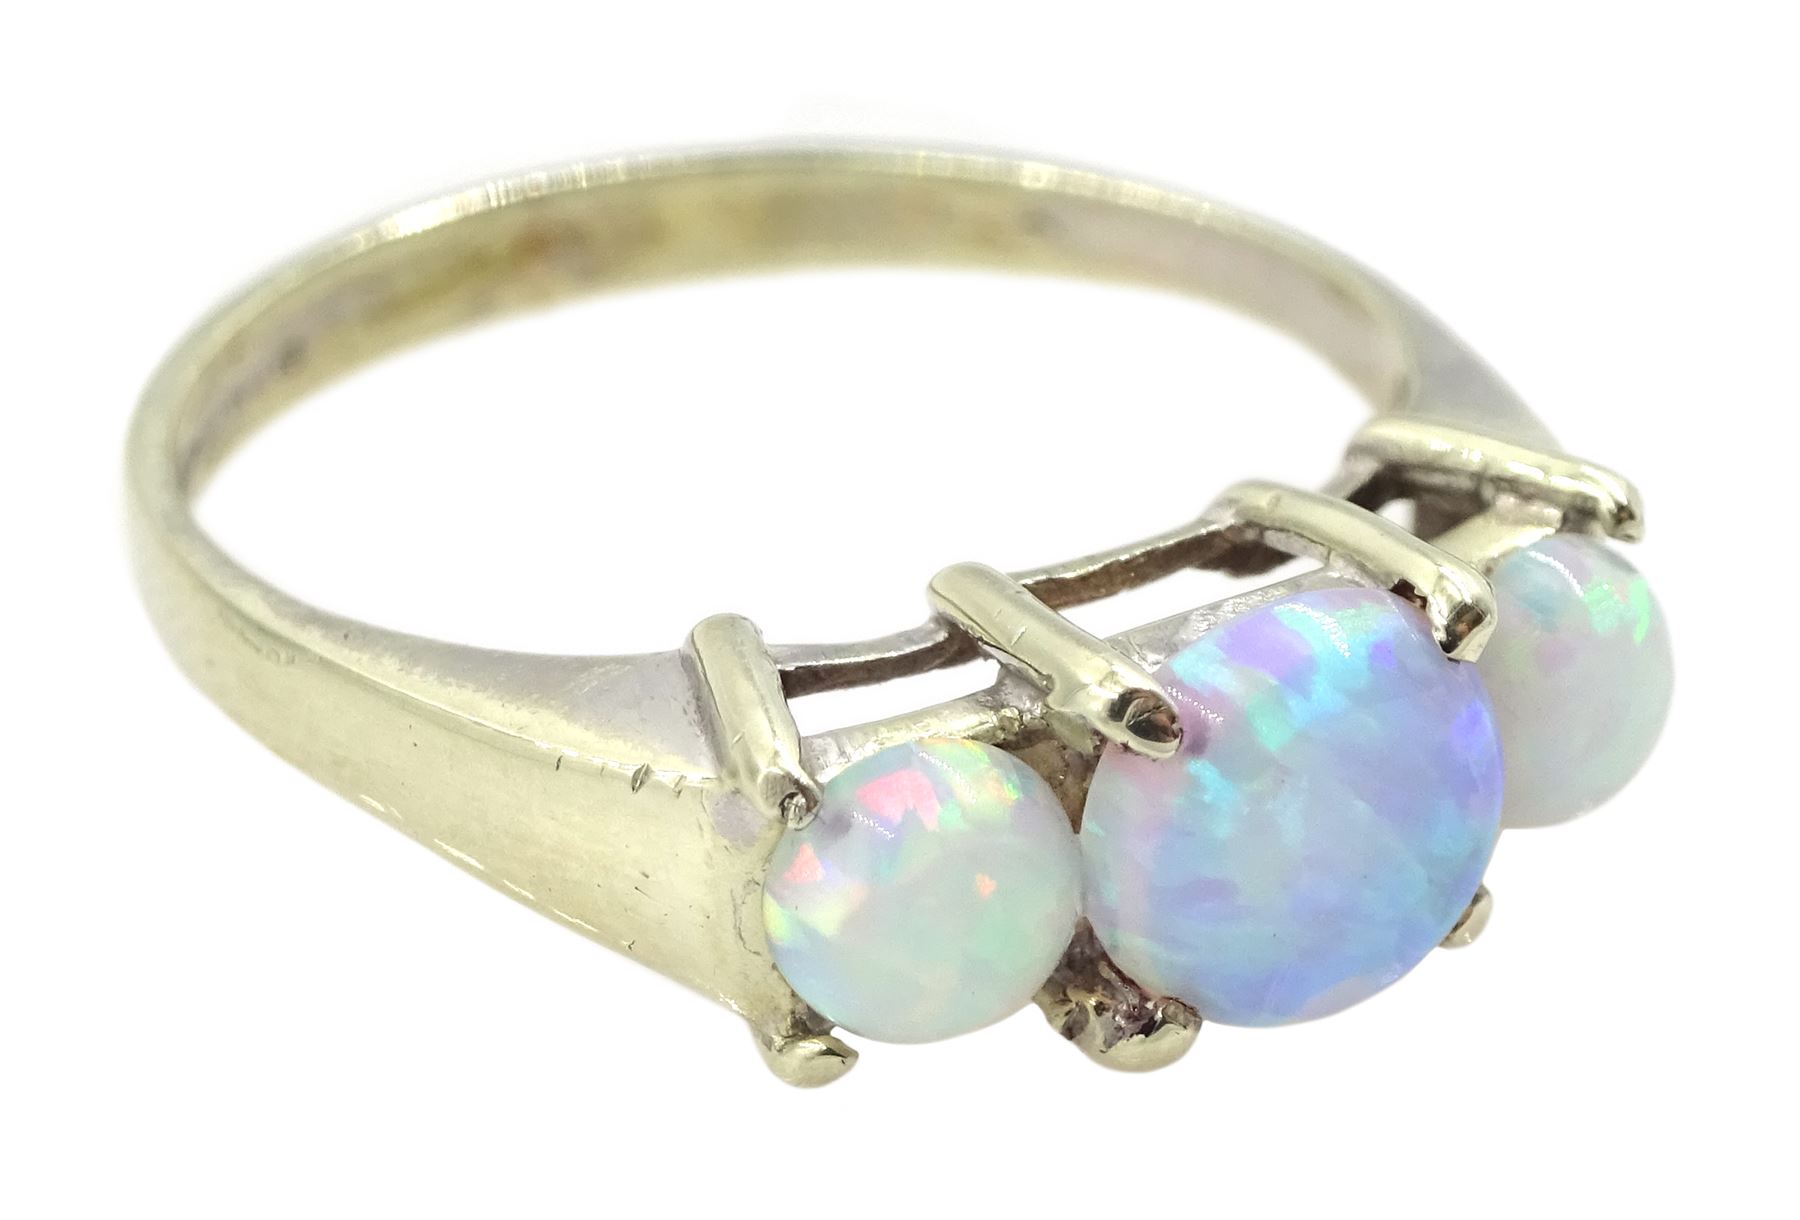 9ct gold three stone opal ring, hallmarked - Jewellery, Watches, Silver ...